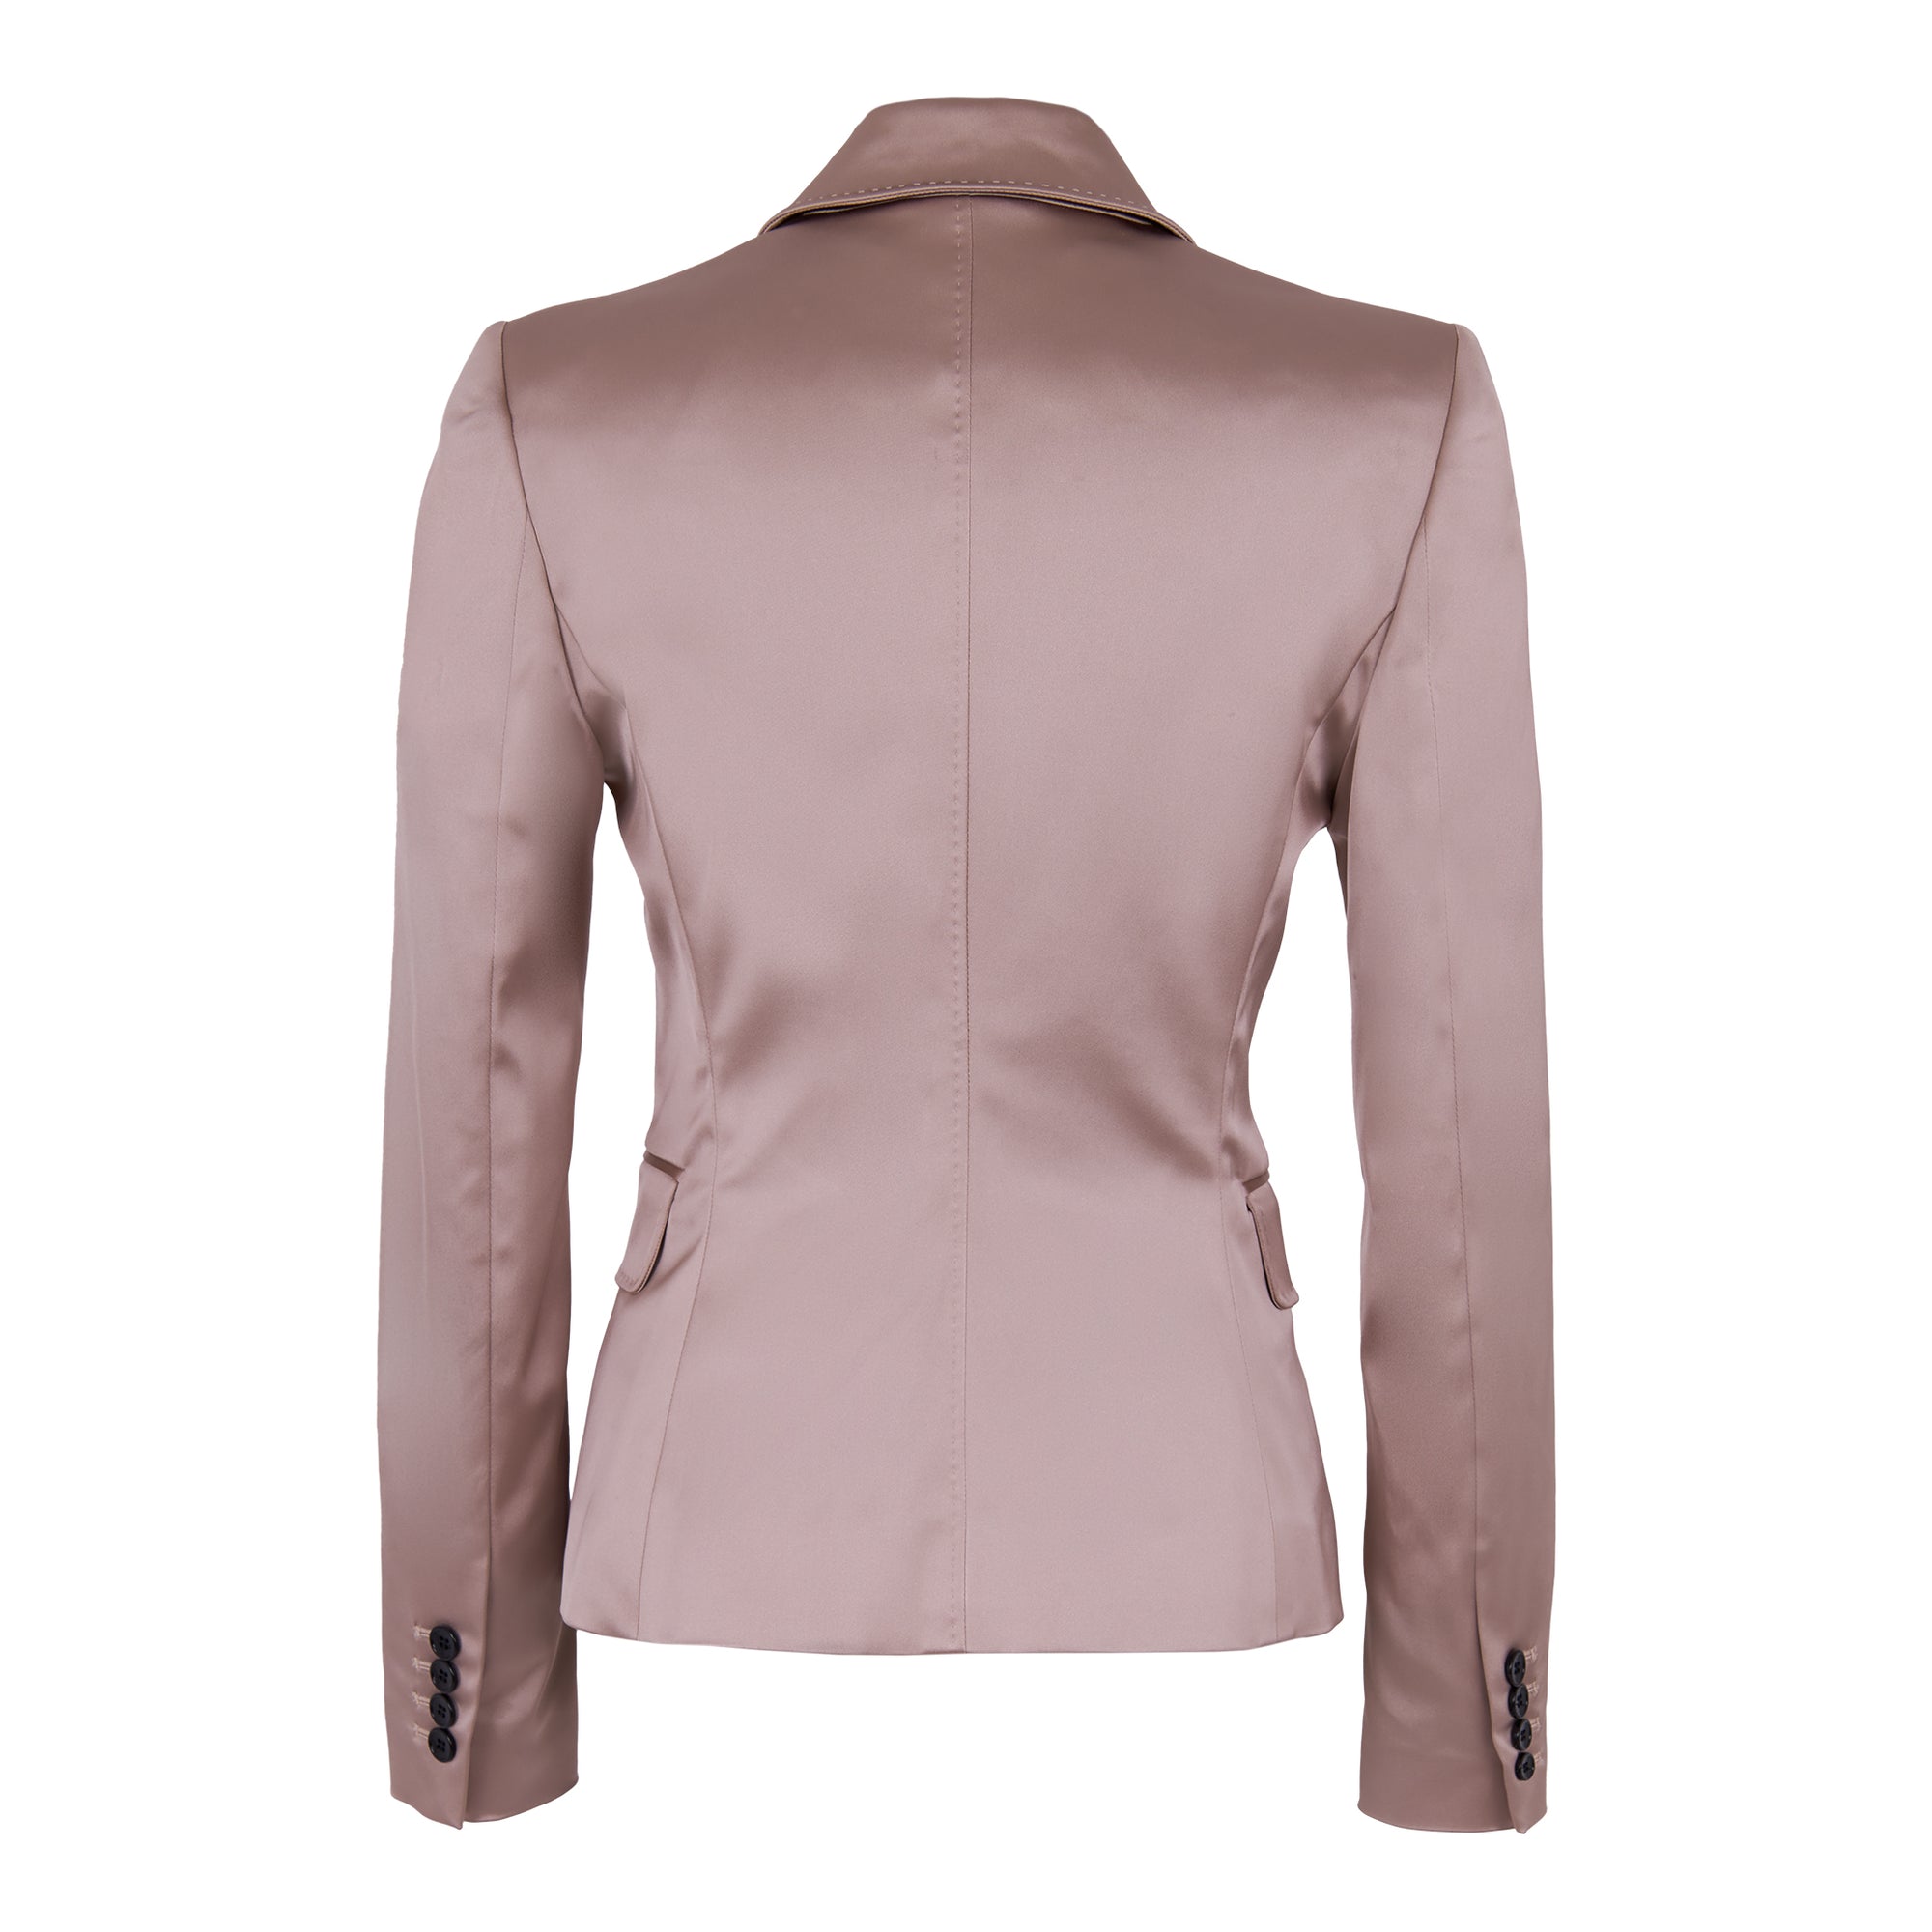 Dolce and Gabbana Pale Pink Contrast Notched Collar Detail Satin Blazer